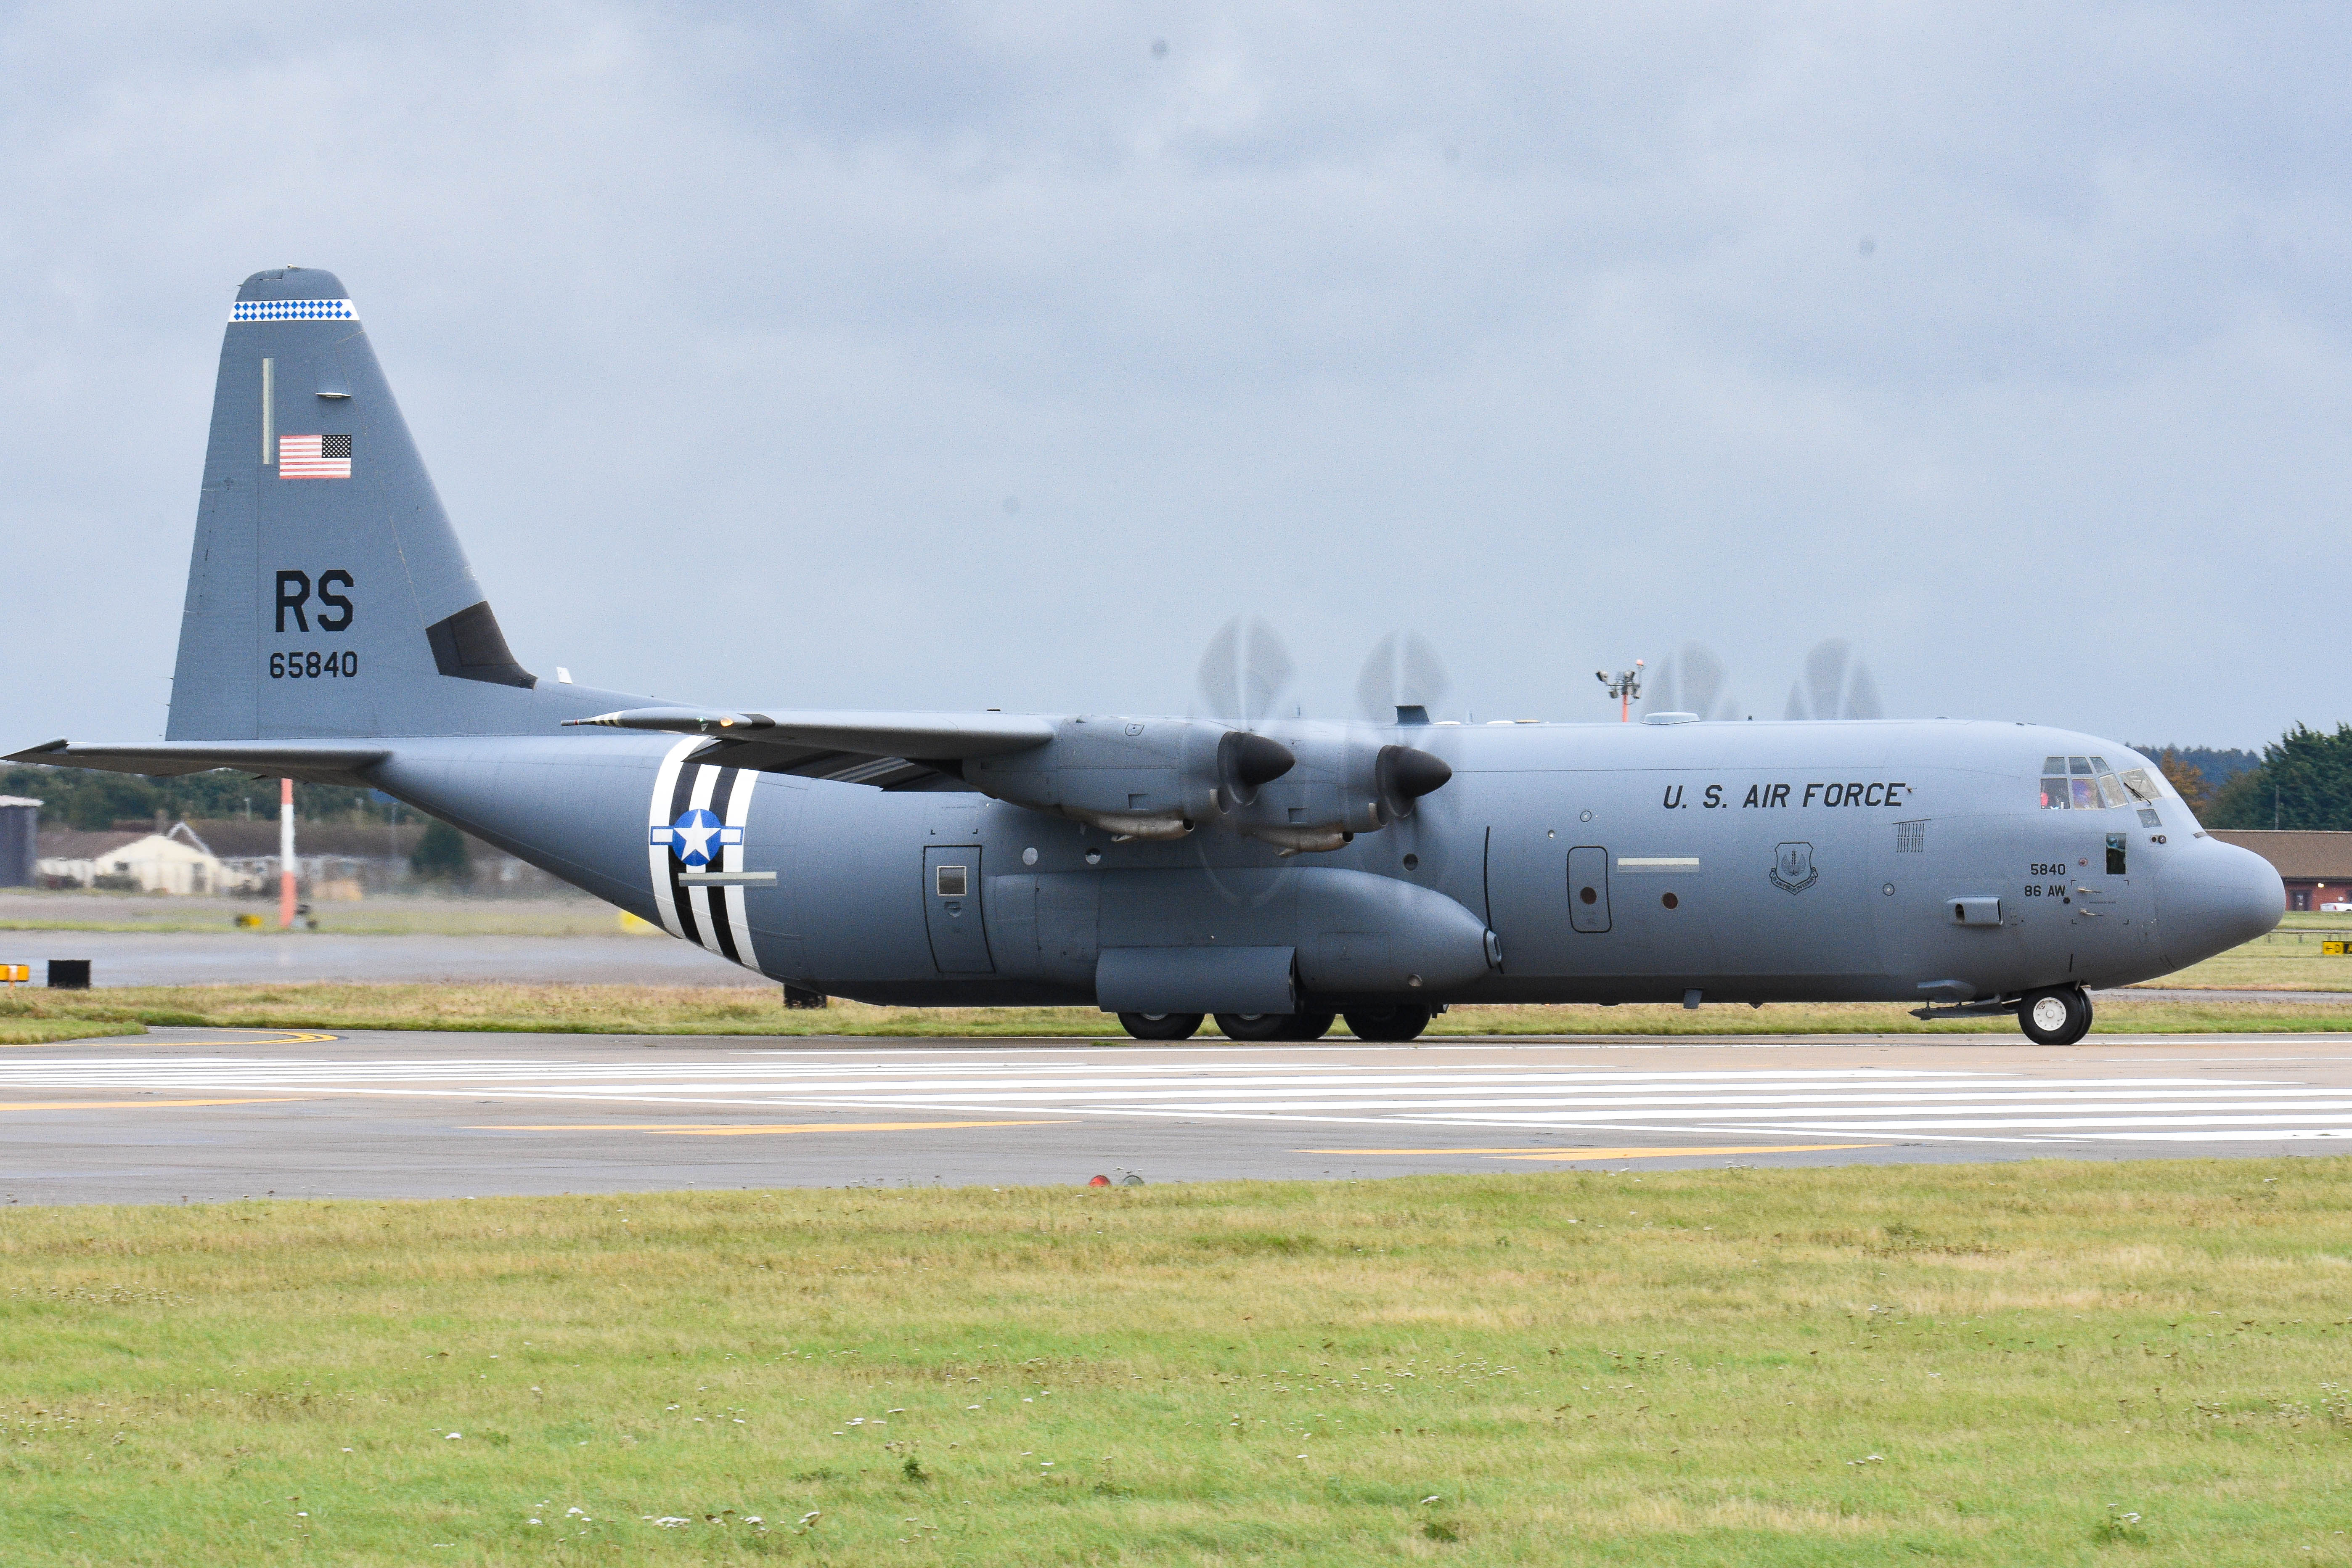 16-5840/165840 USAF - United States Air Force Lockheed C-130J-30 Hercules Photo by colinw - AVSpotters.com